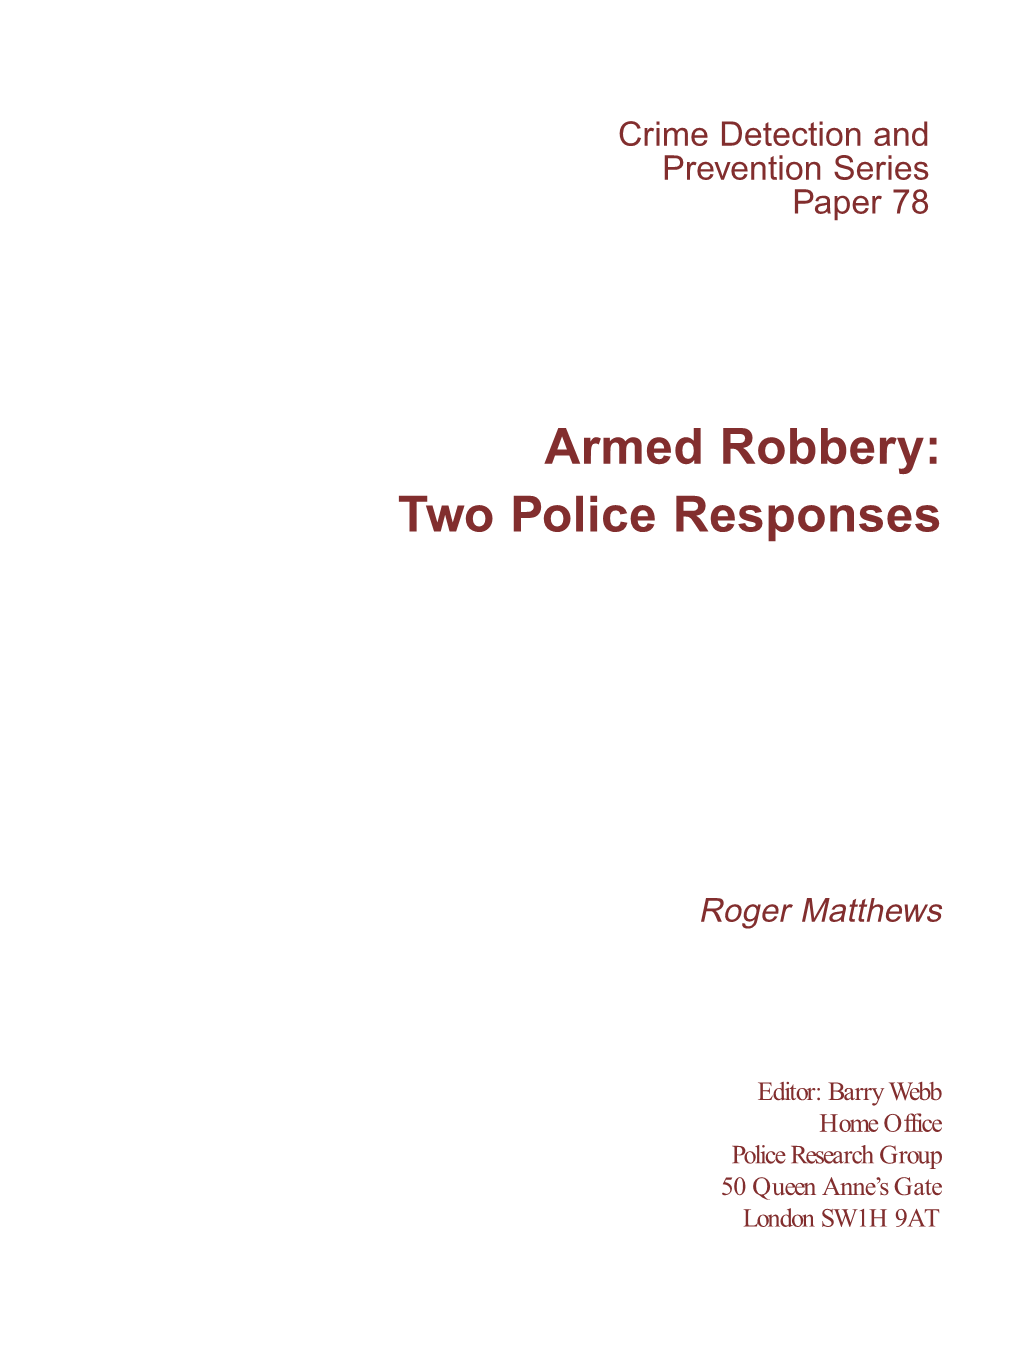 Armed Robbery: Two Police Responses